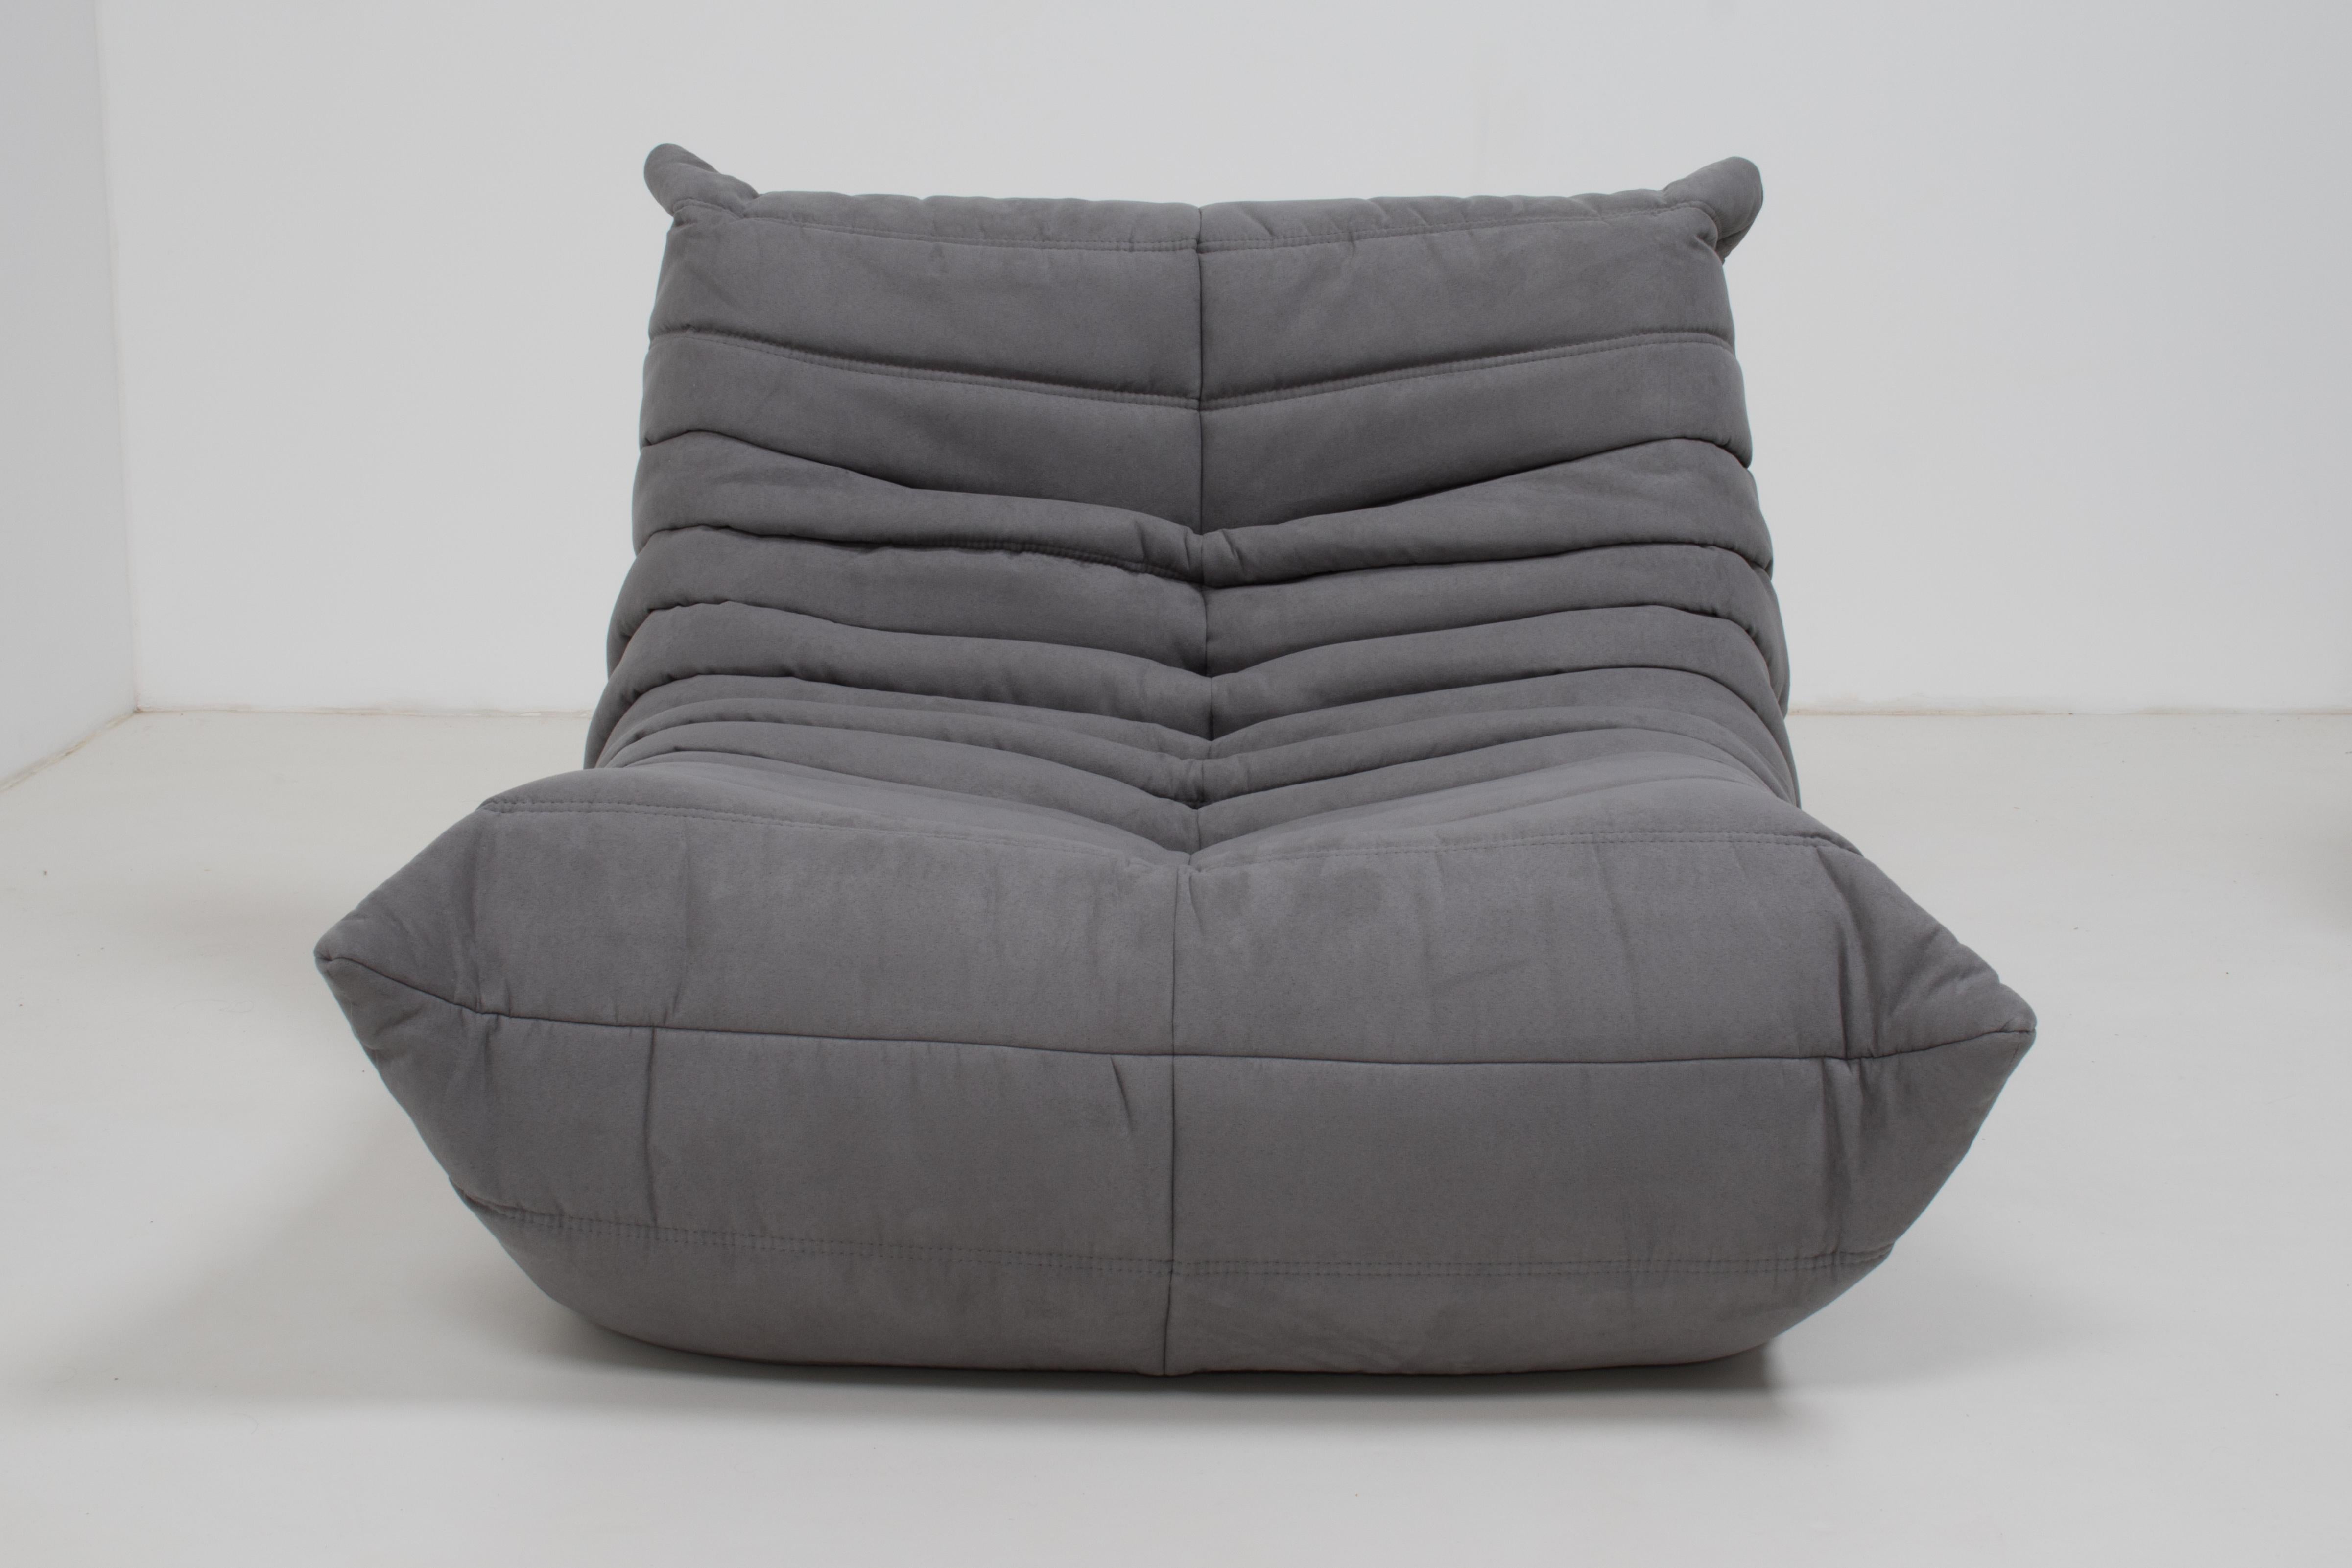 The iconic Togo grey sofa, originally designed by Michel Ducaroy for Ligne Roset in 1973, has become a design midcentury Classic.

This fireside chair is incredibly versatile and can be used alone or paired with other pieces from the range.

The